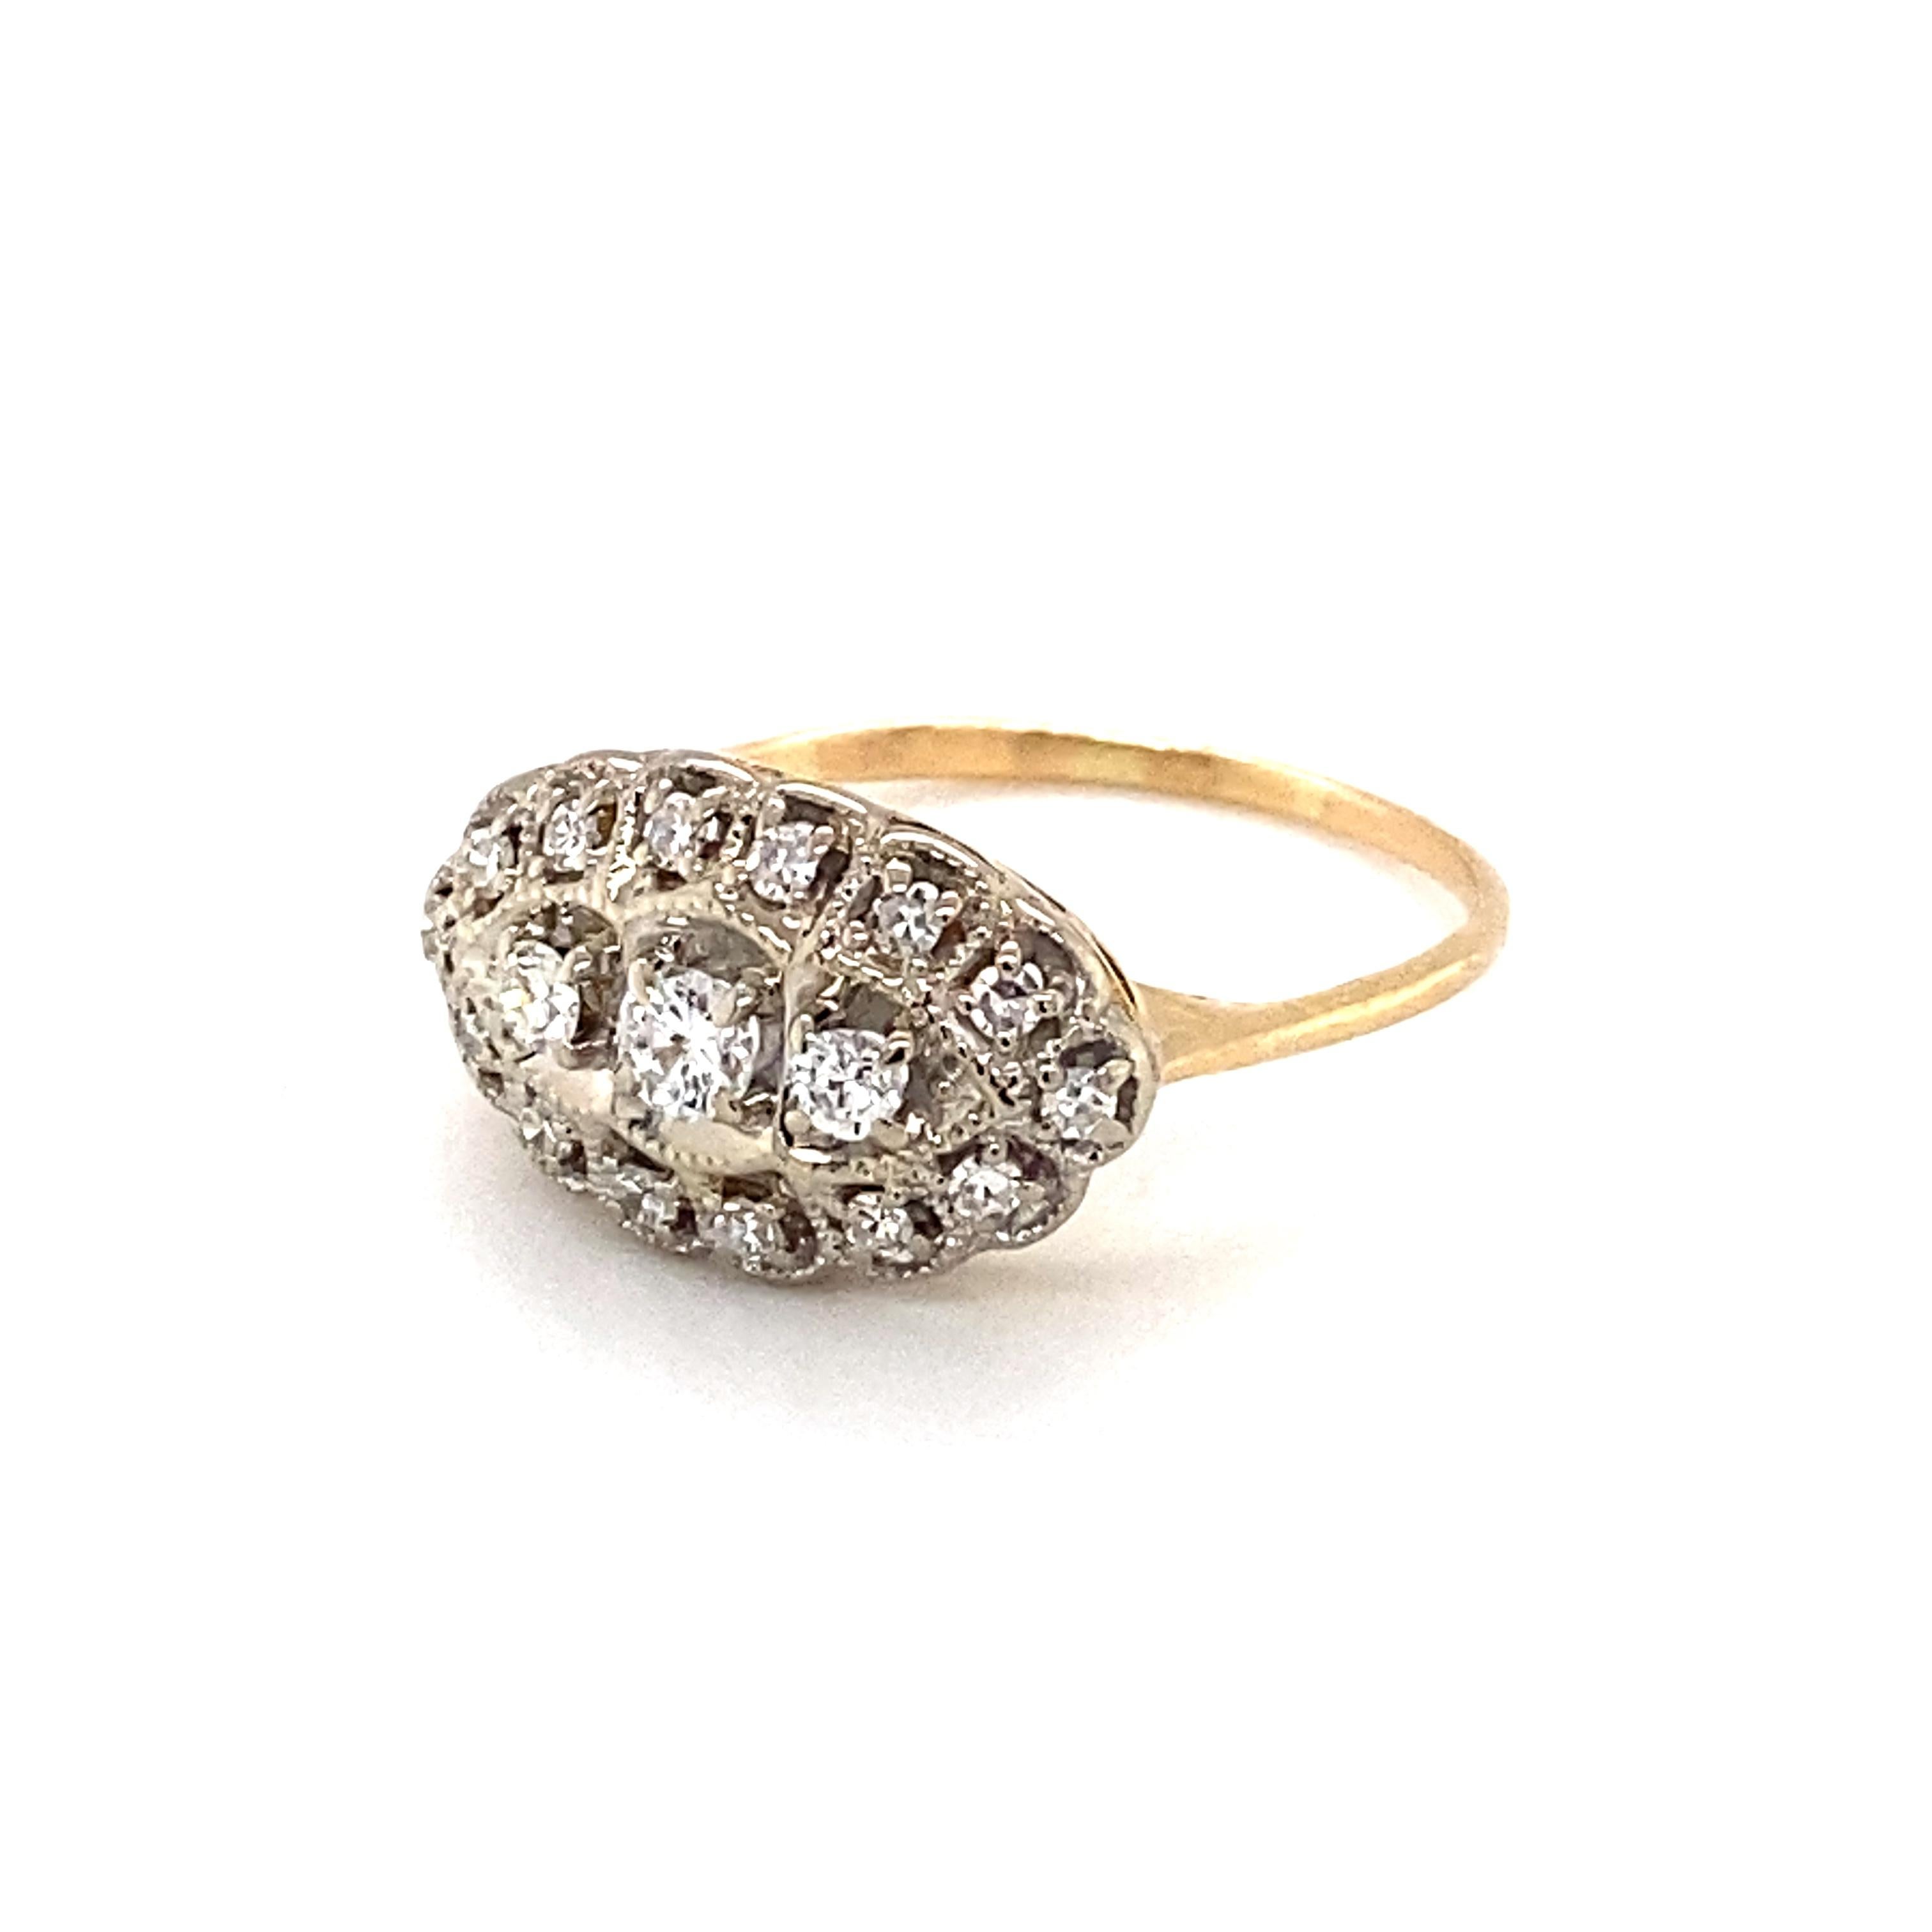 Women's 1930s Art Deco 0.25 Carat Diamond Ring in 14 Karat White and Yellow Gold For Sale